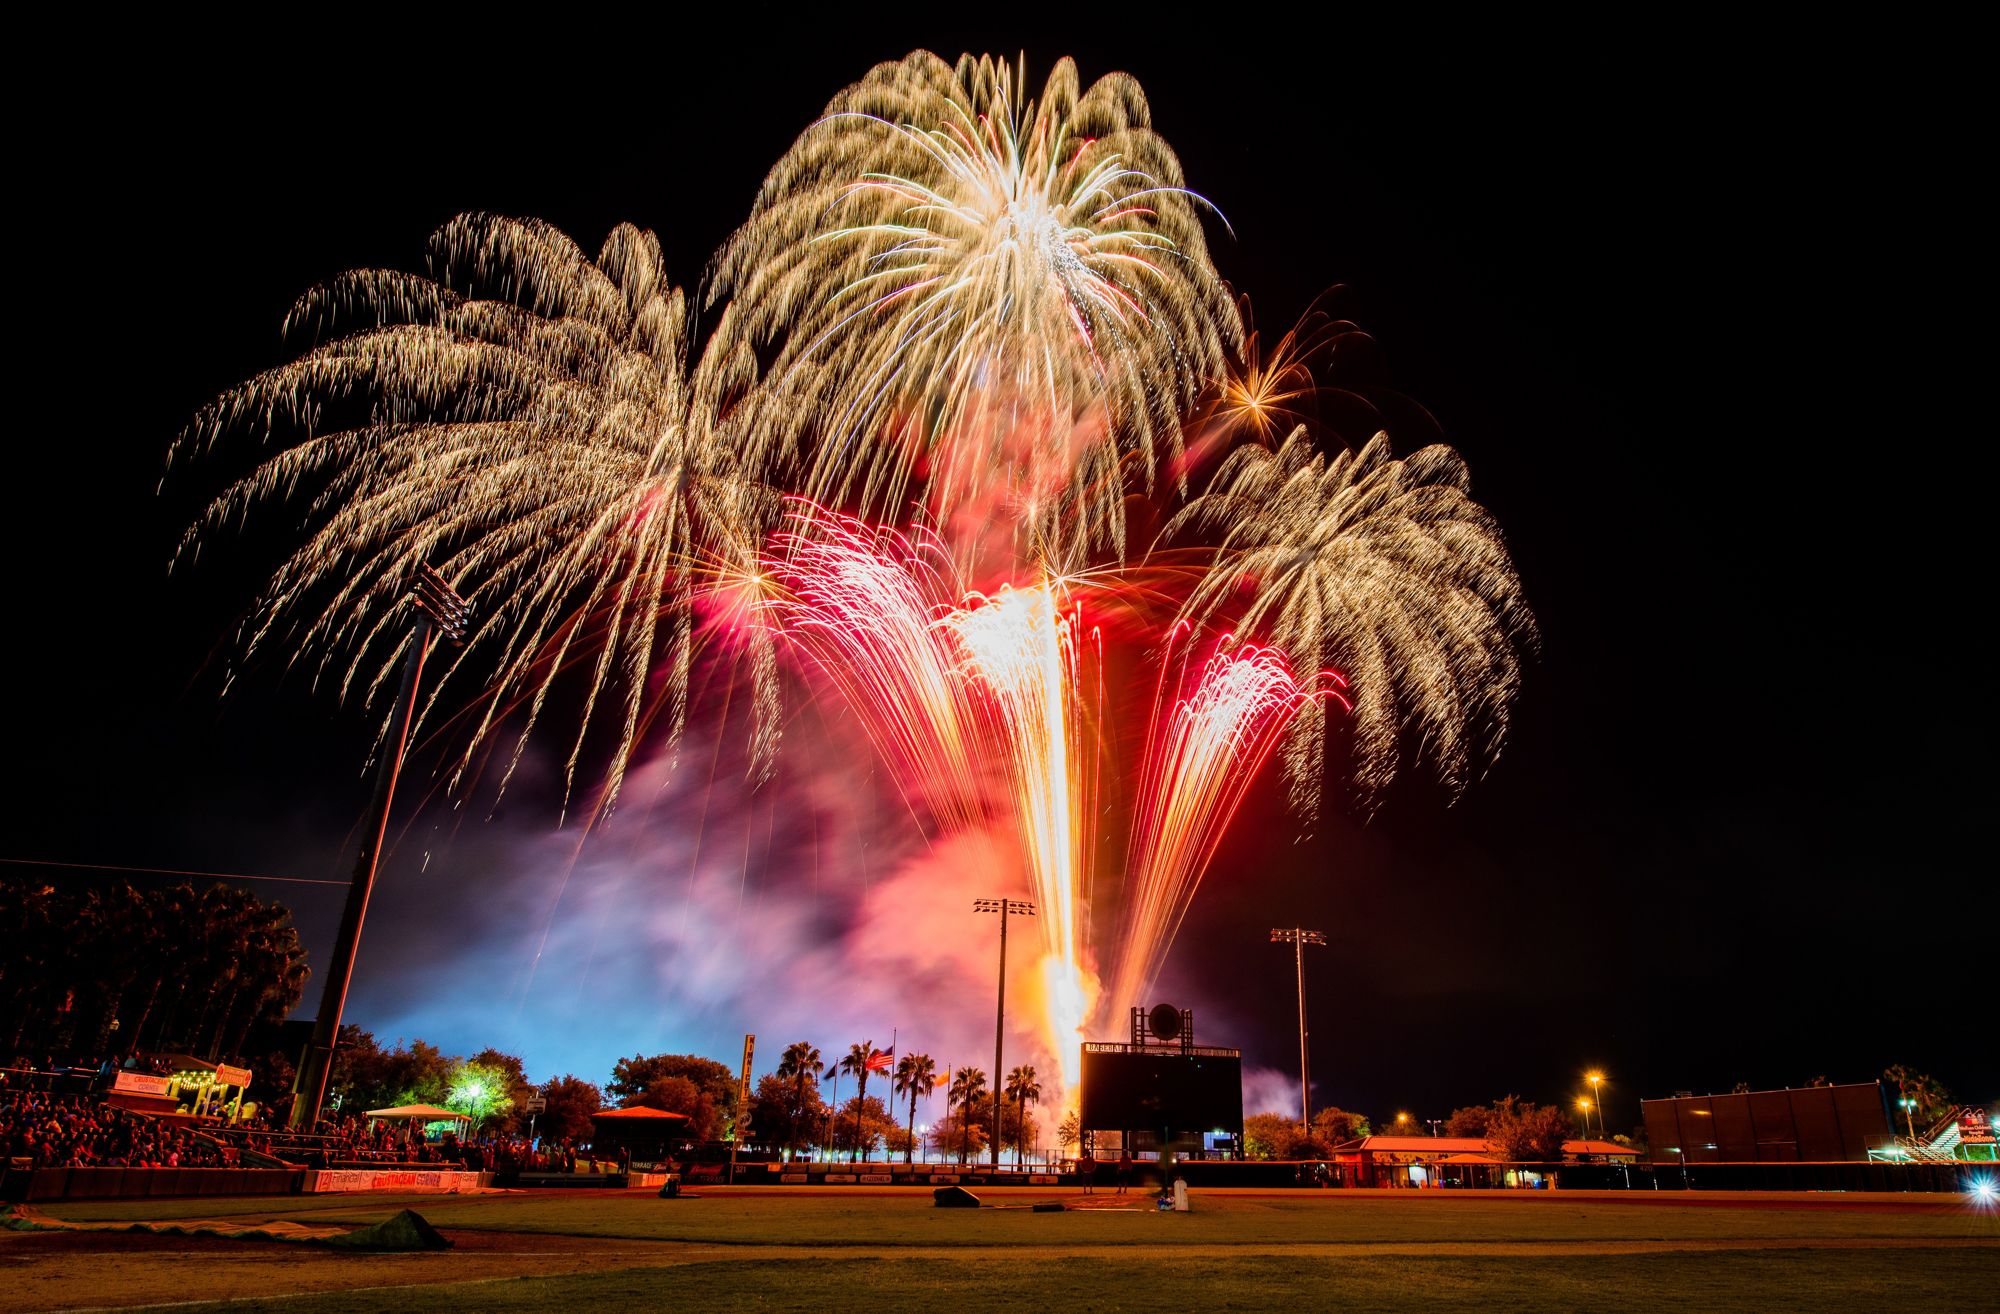 The Jumbo Shrimp will continue fireworks shows at 121 Financial Ballpark.